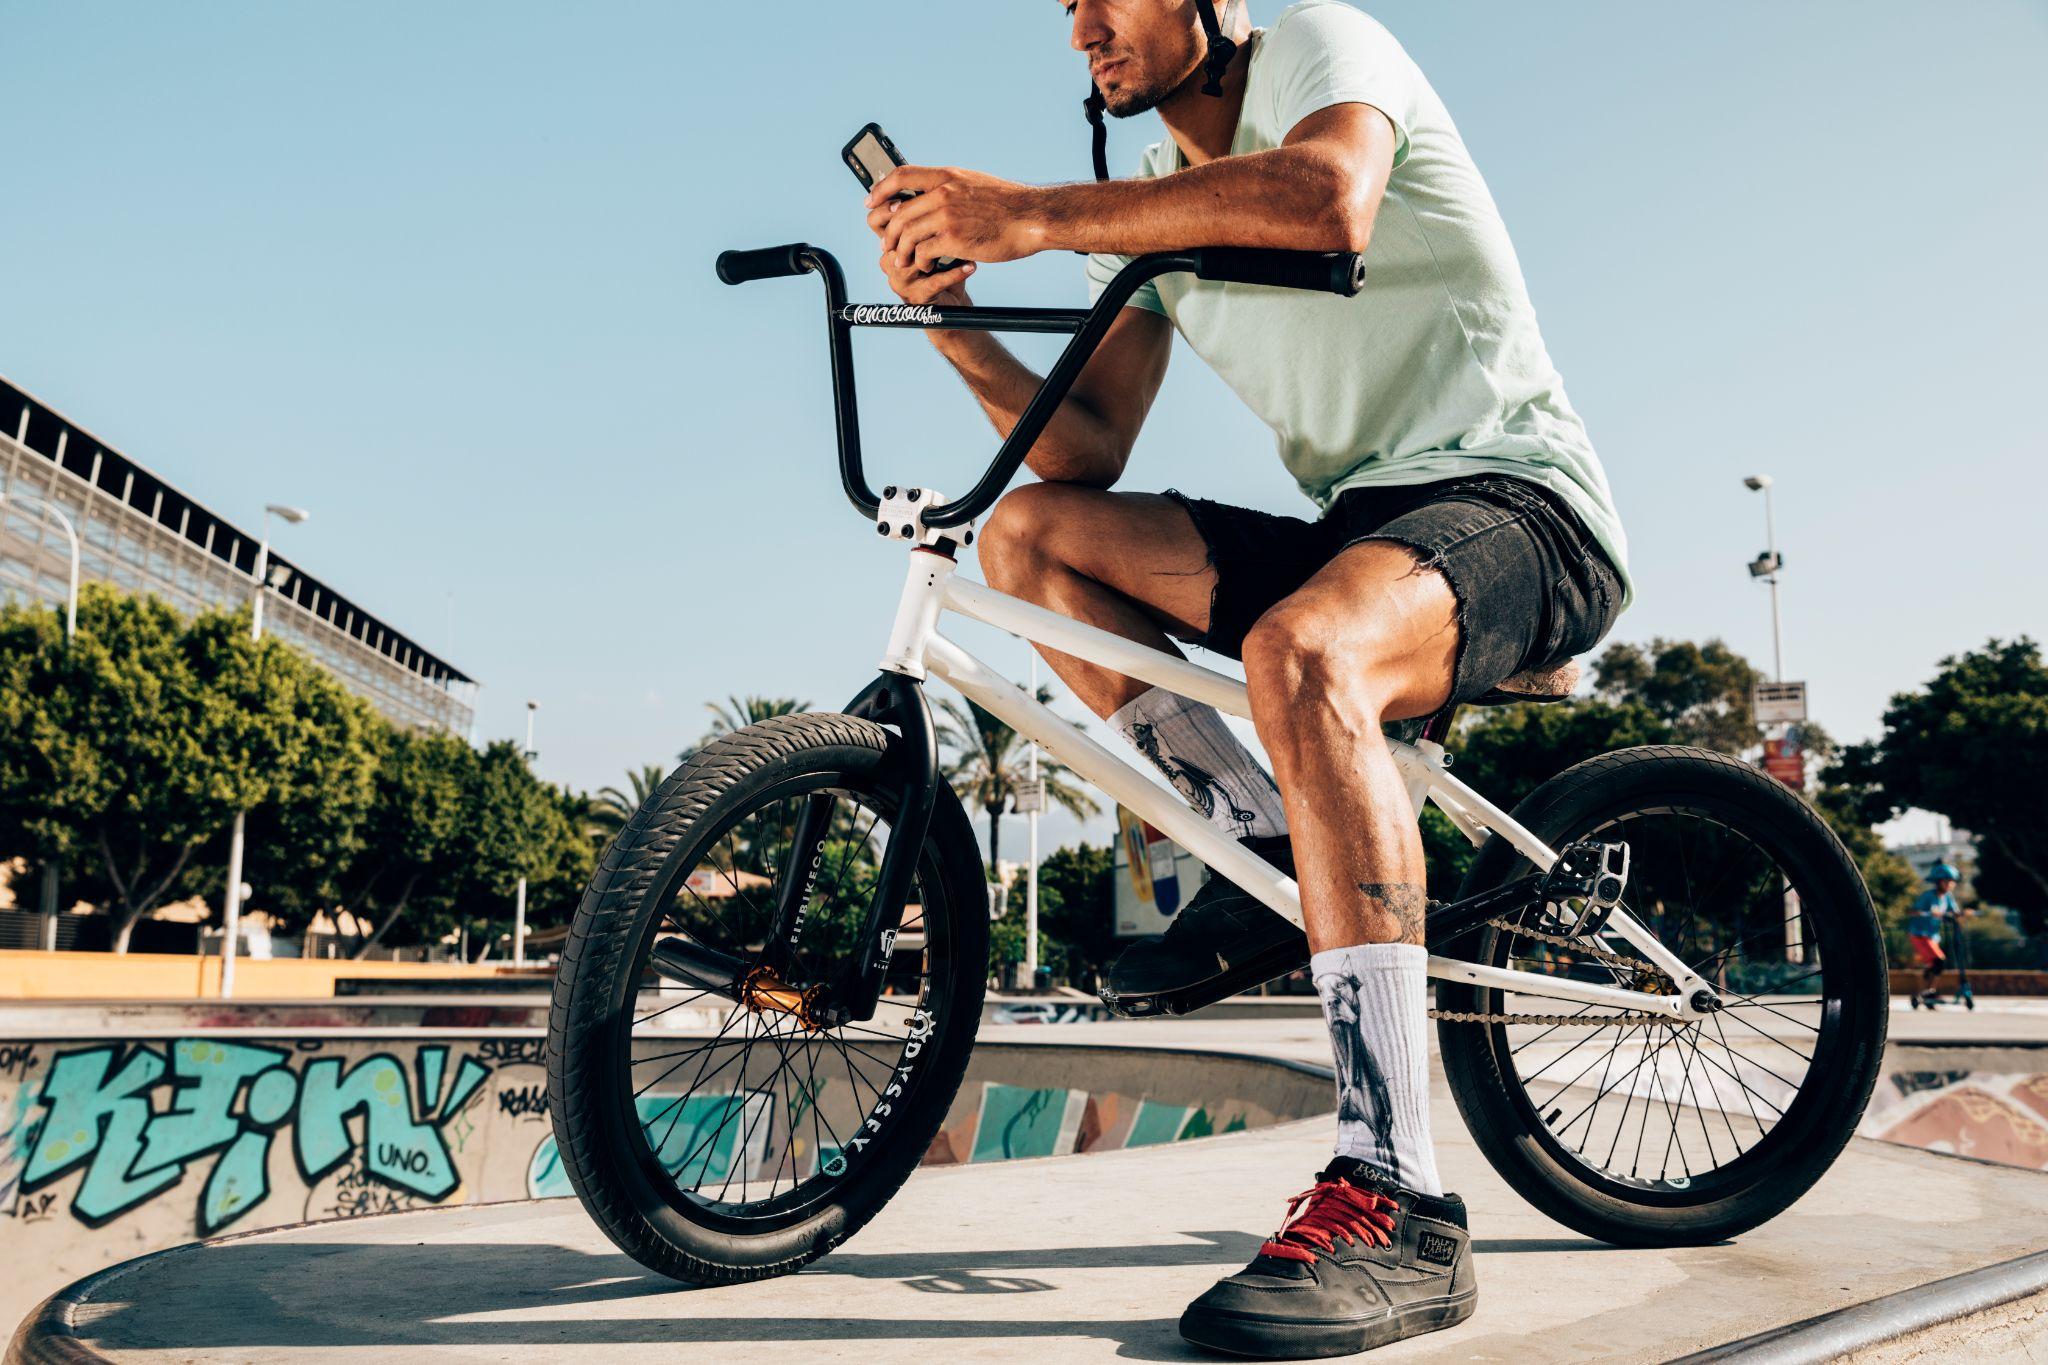 A New Way to Exercise: Riding an E-bike